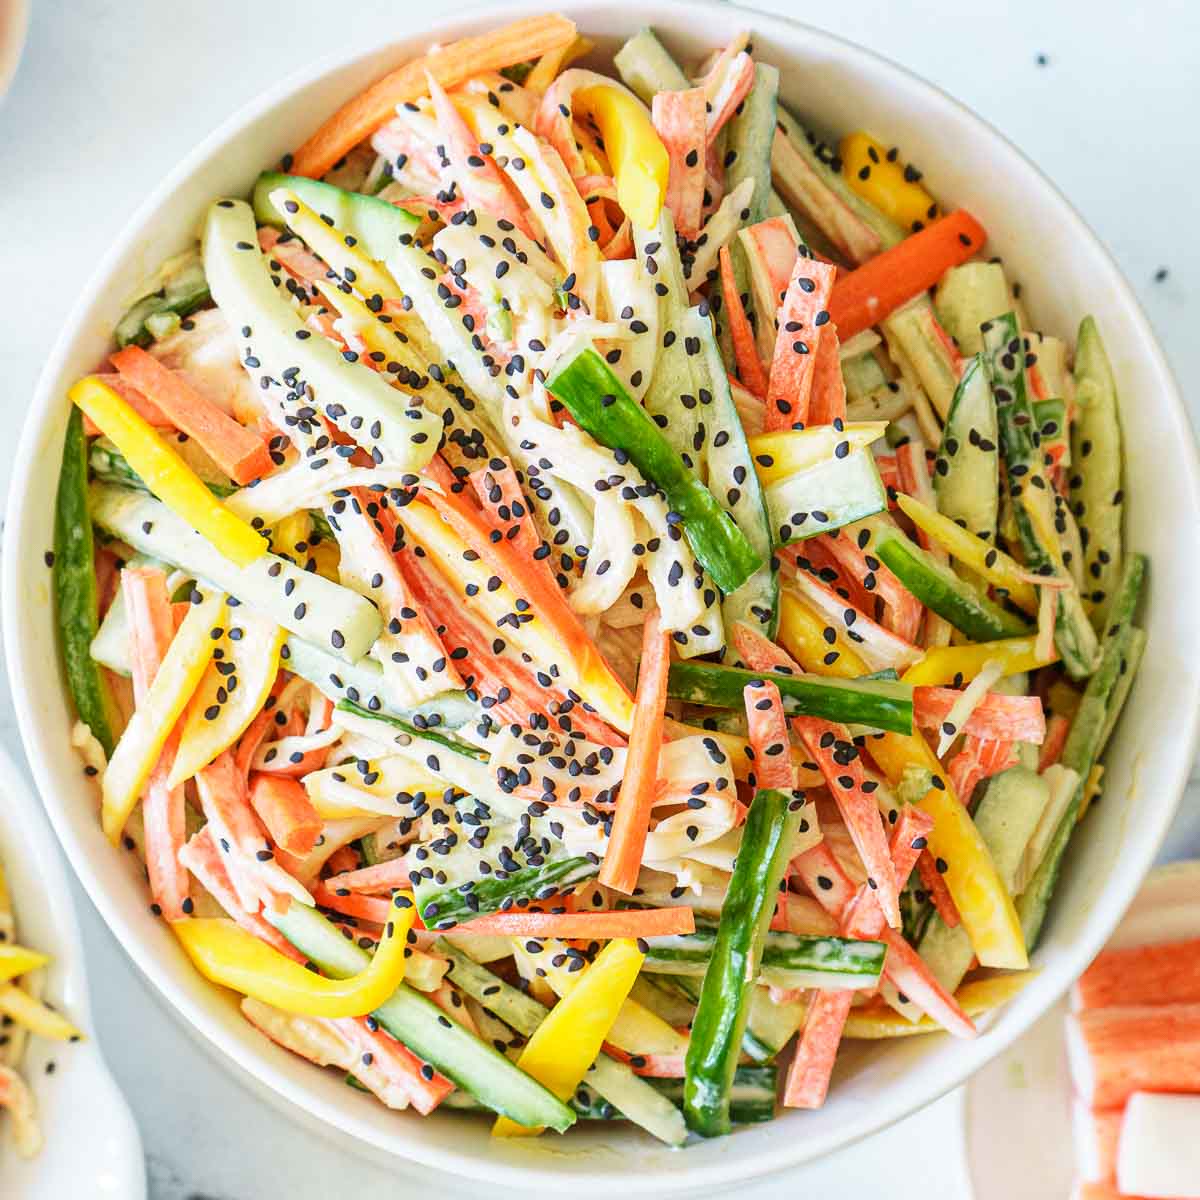 https://www.peelwithzeal.com/wp-content/uploads/2022/03/spicy-kani-salad-with-mango.jpg